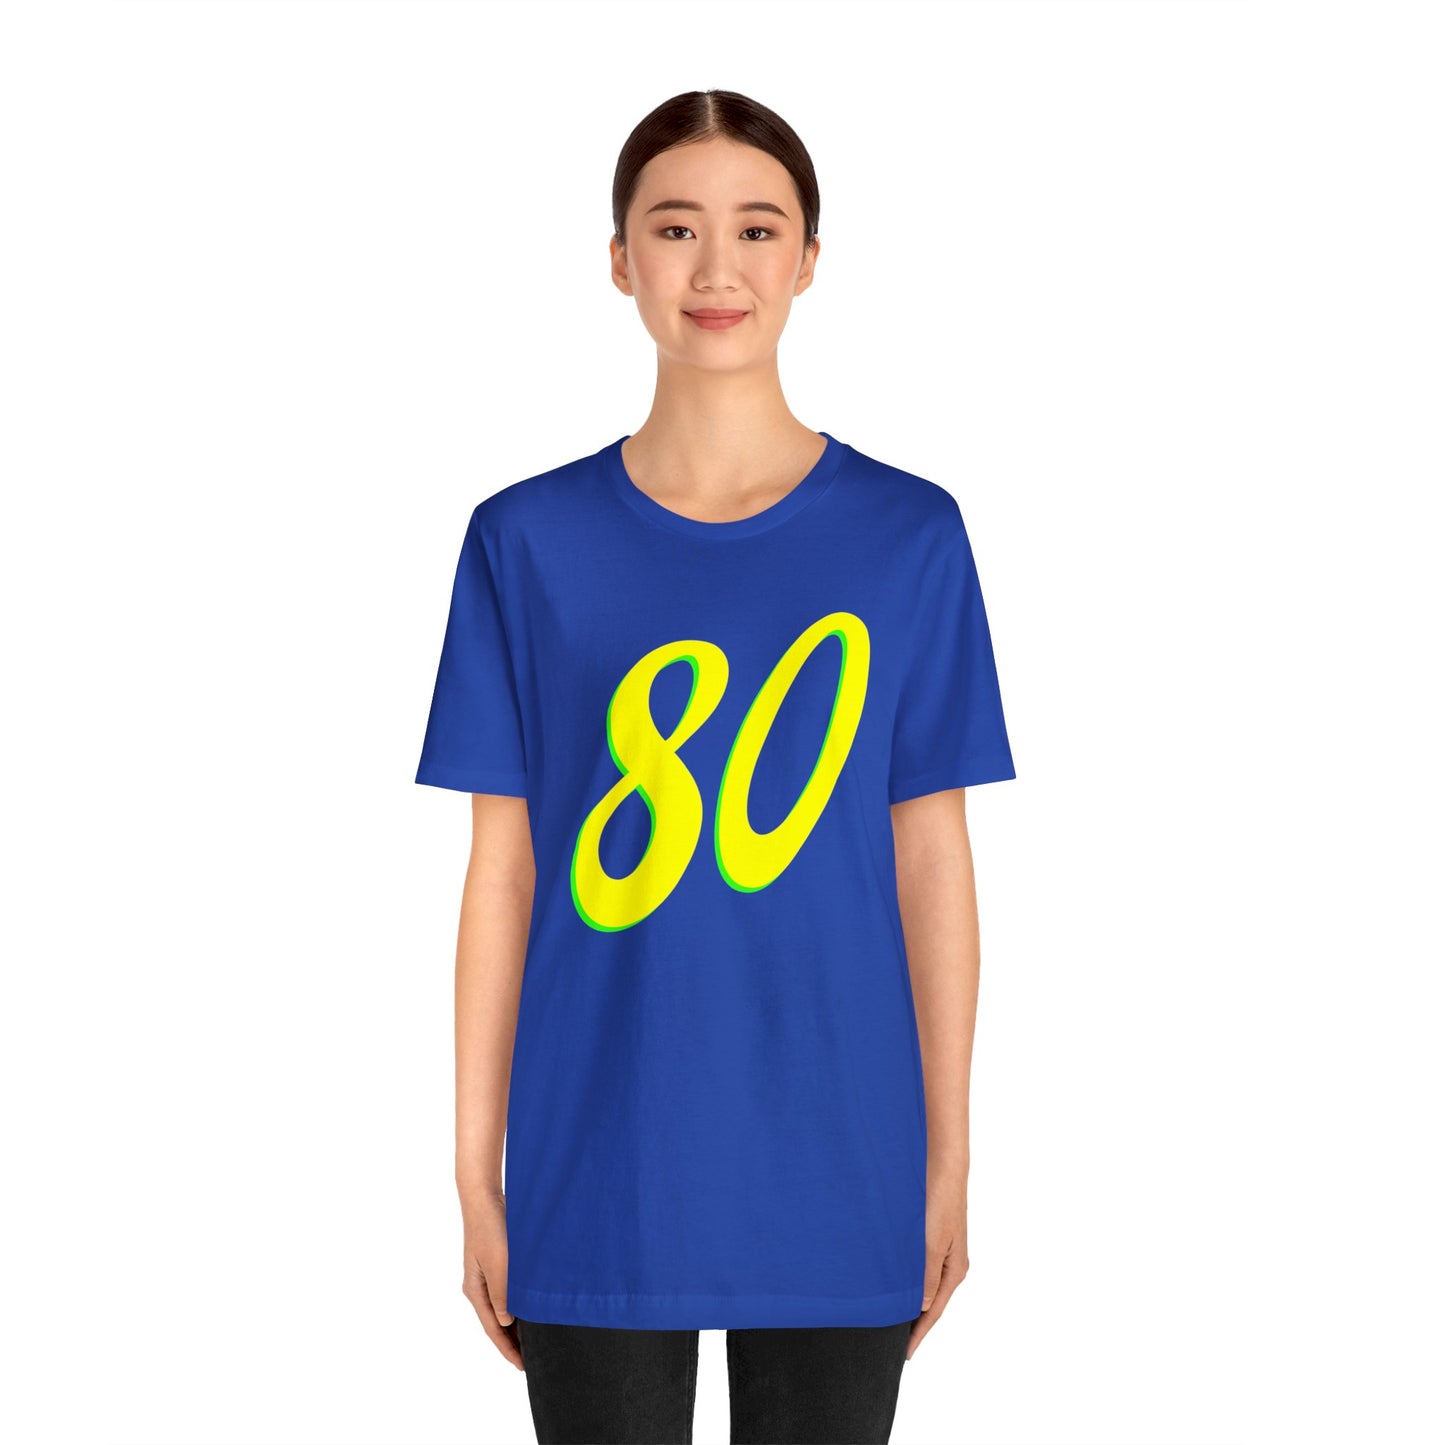 Number 80 Design - Soft Cotton Tee for birthdays and celebrations, Gift for friends and family, Multiple Options by clothezy.com in Gold Size Medium - Buy Now